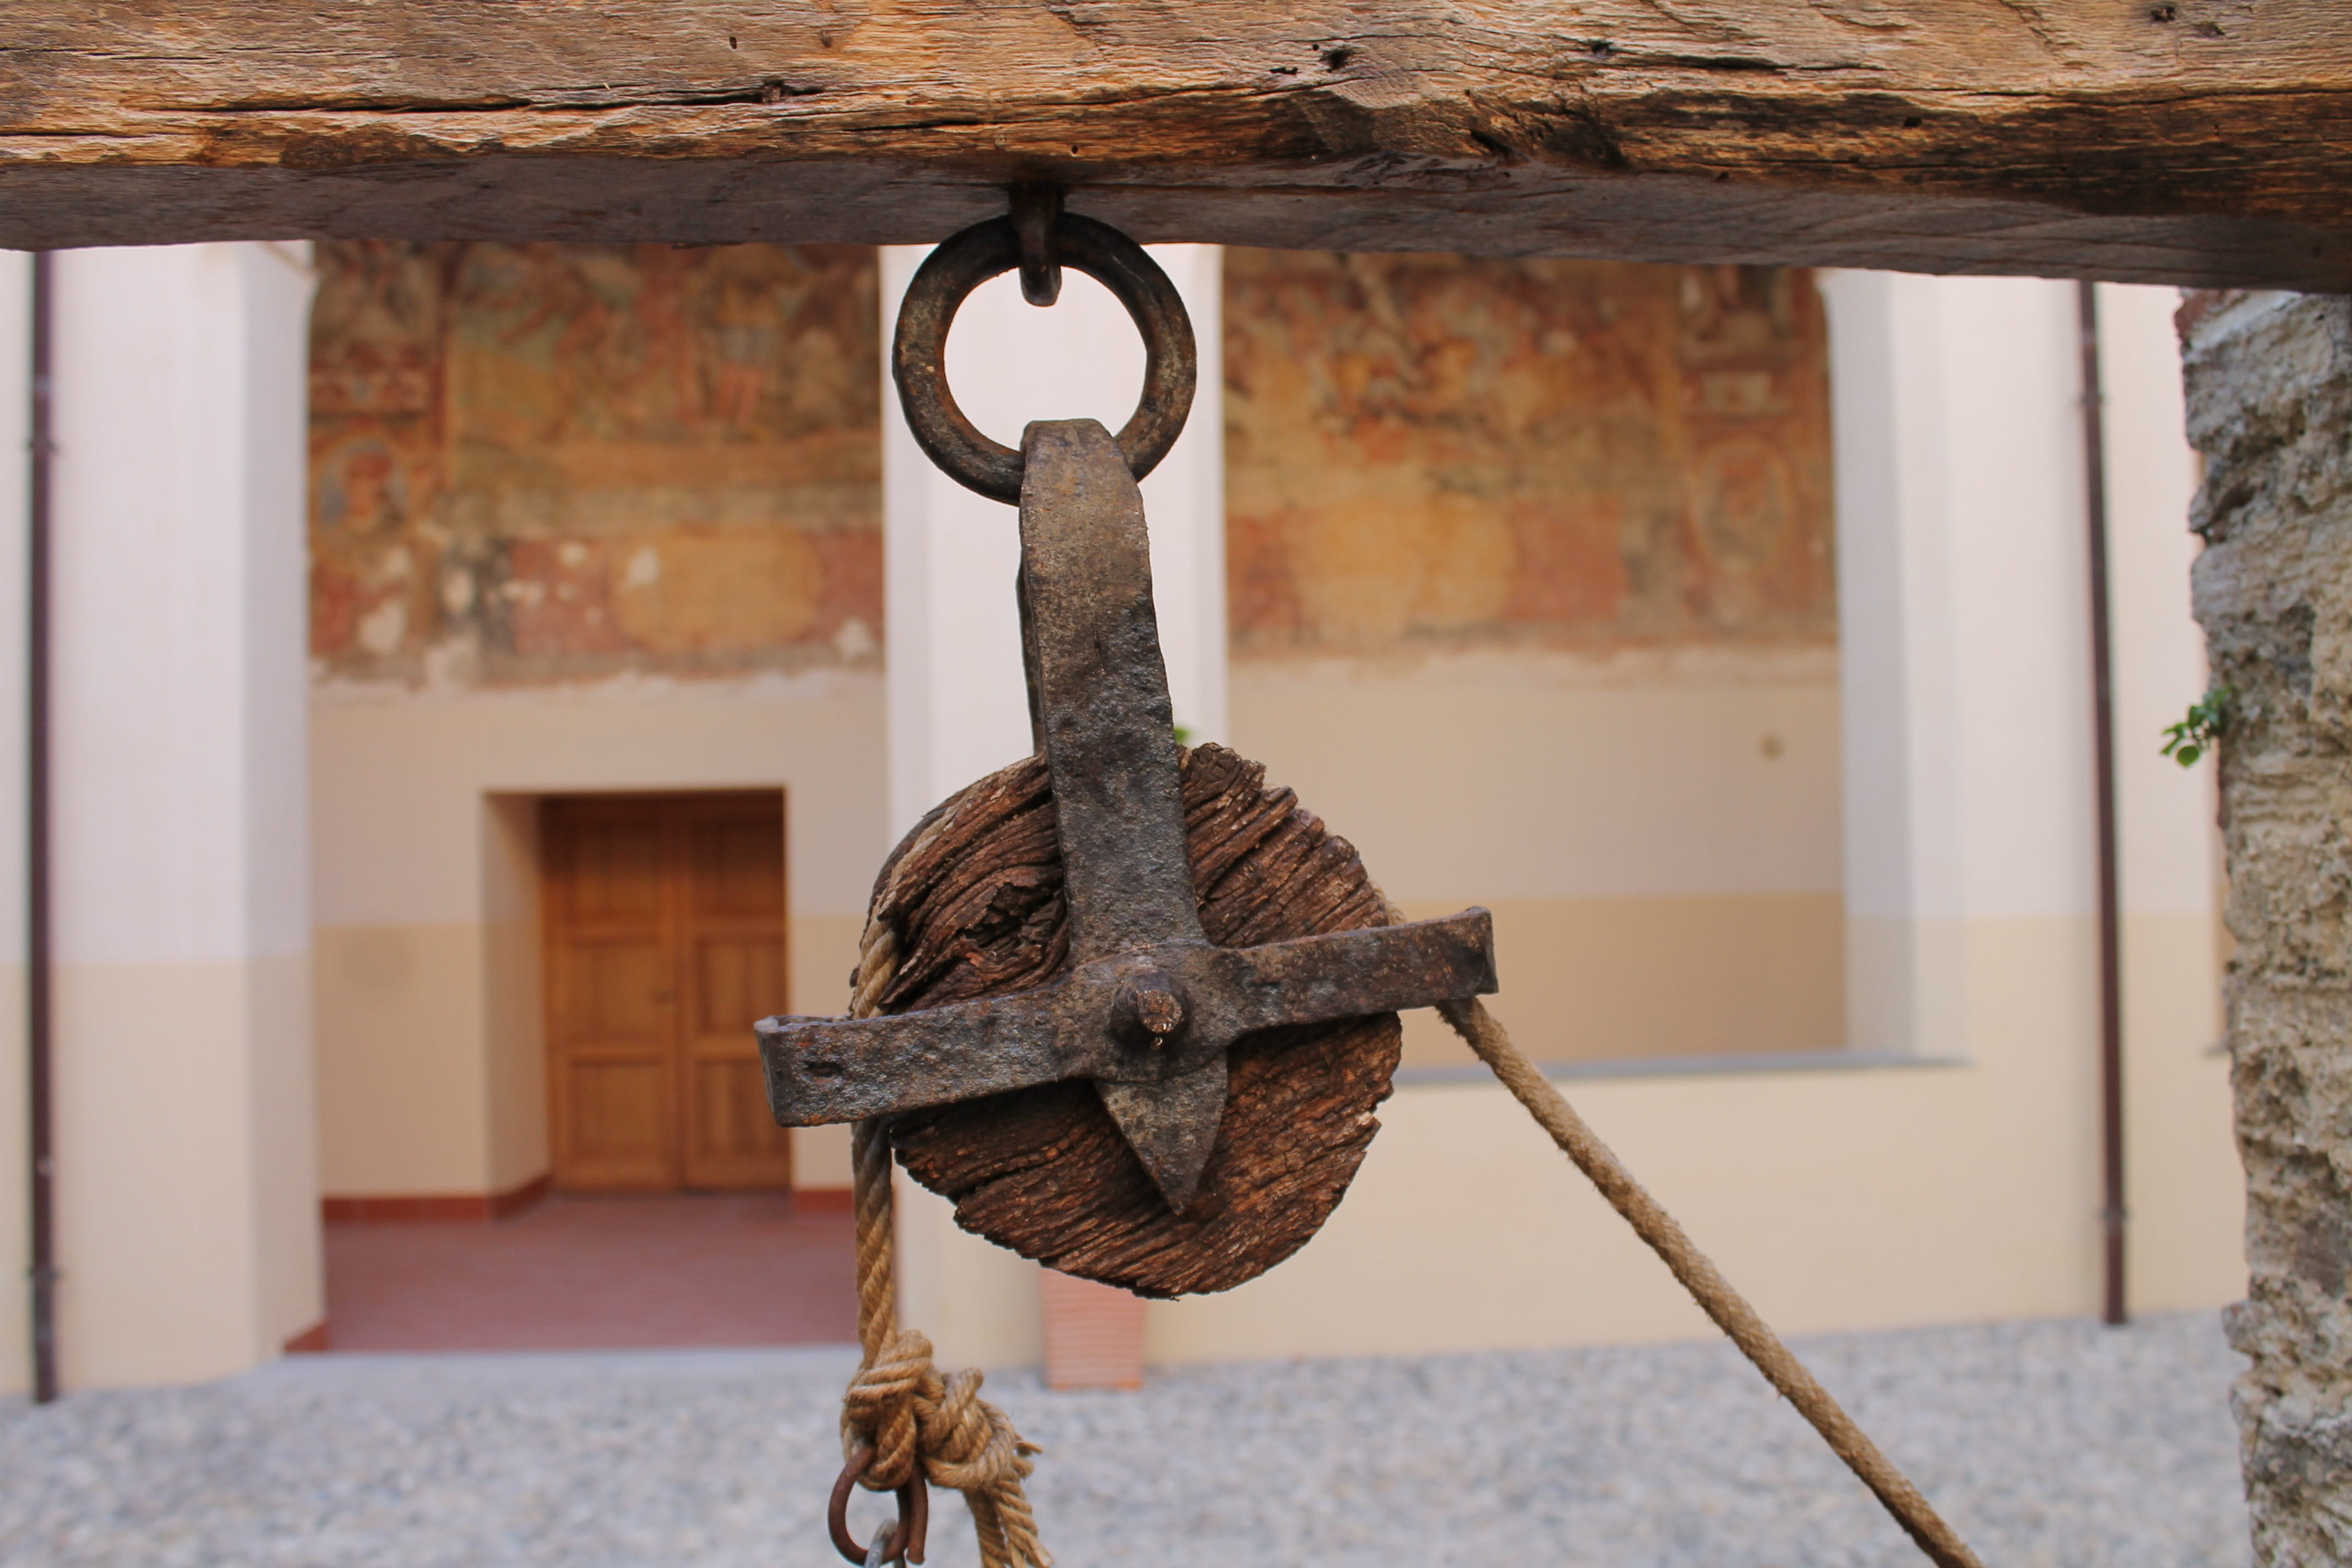 Pulley, Pozzo, Cross, Rope, Wood, suspended, indoors, architecture